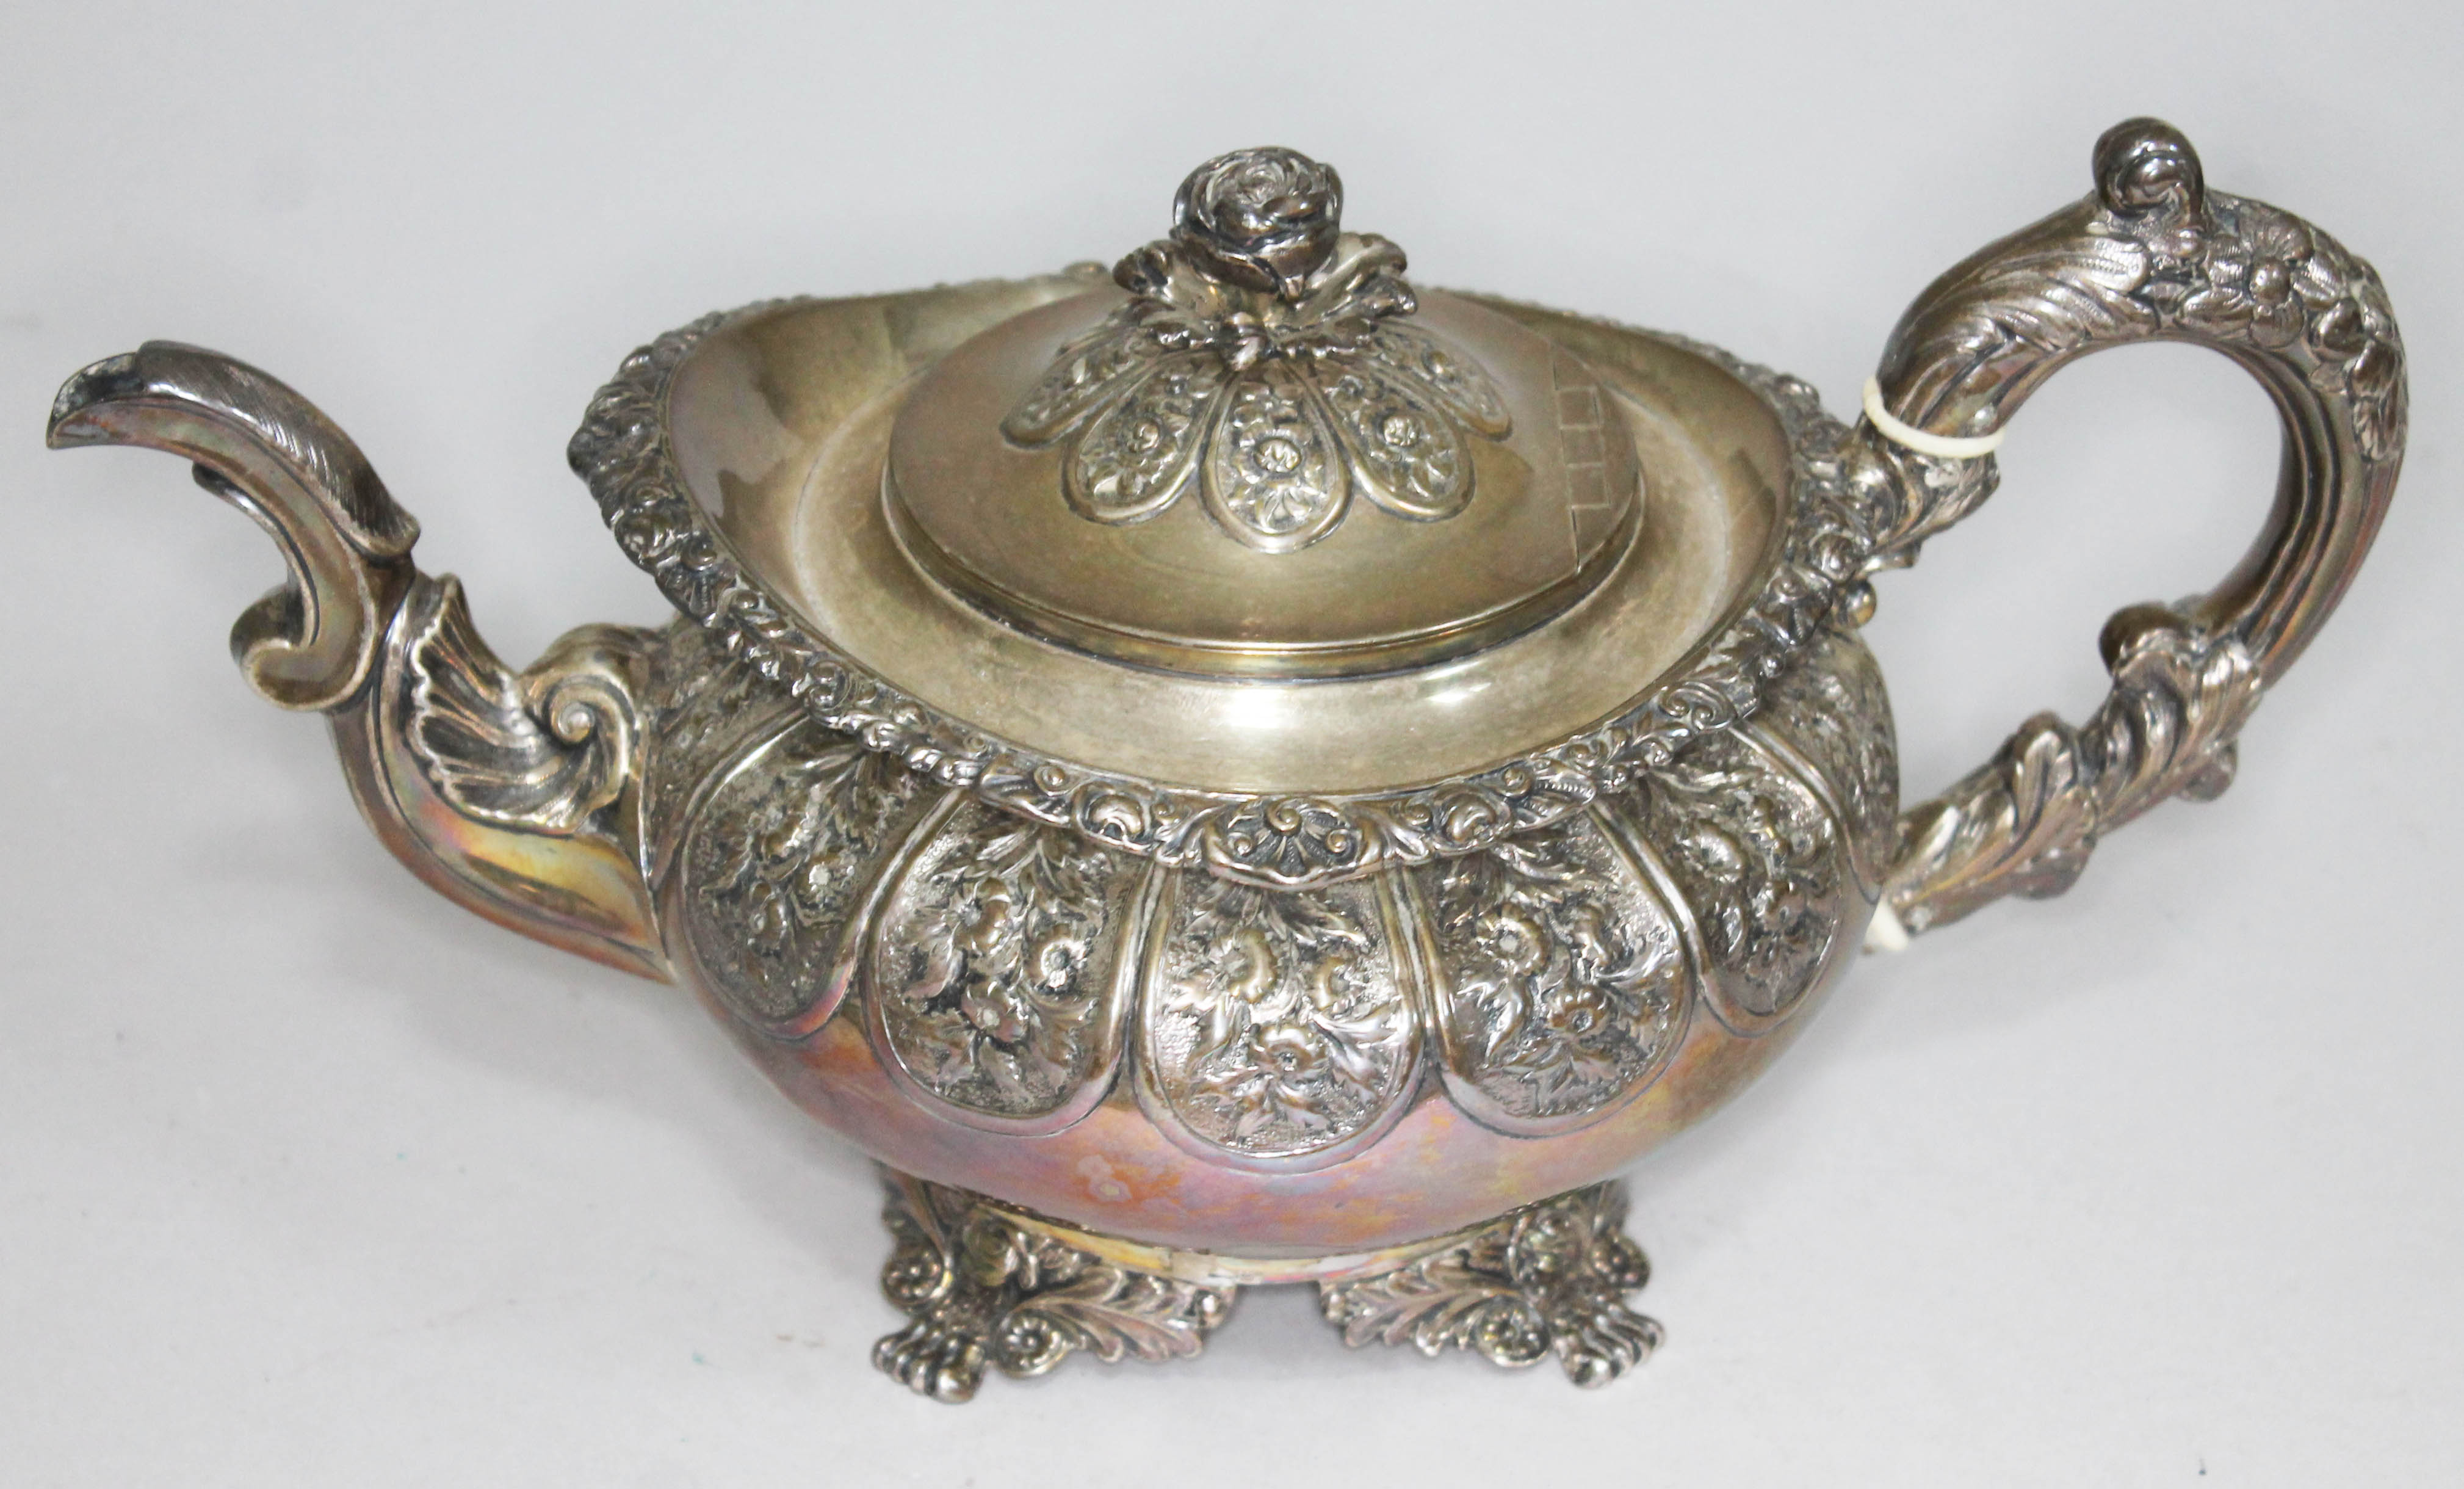 A George IV silver teapot, London 1825, gross wt. 25oz, length 30cm. Condition - rubbing to